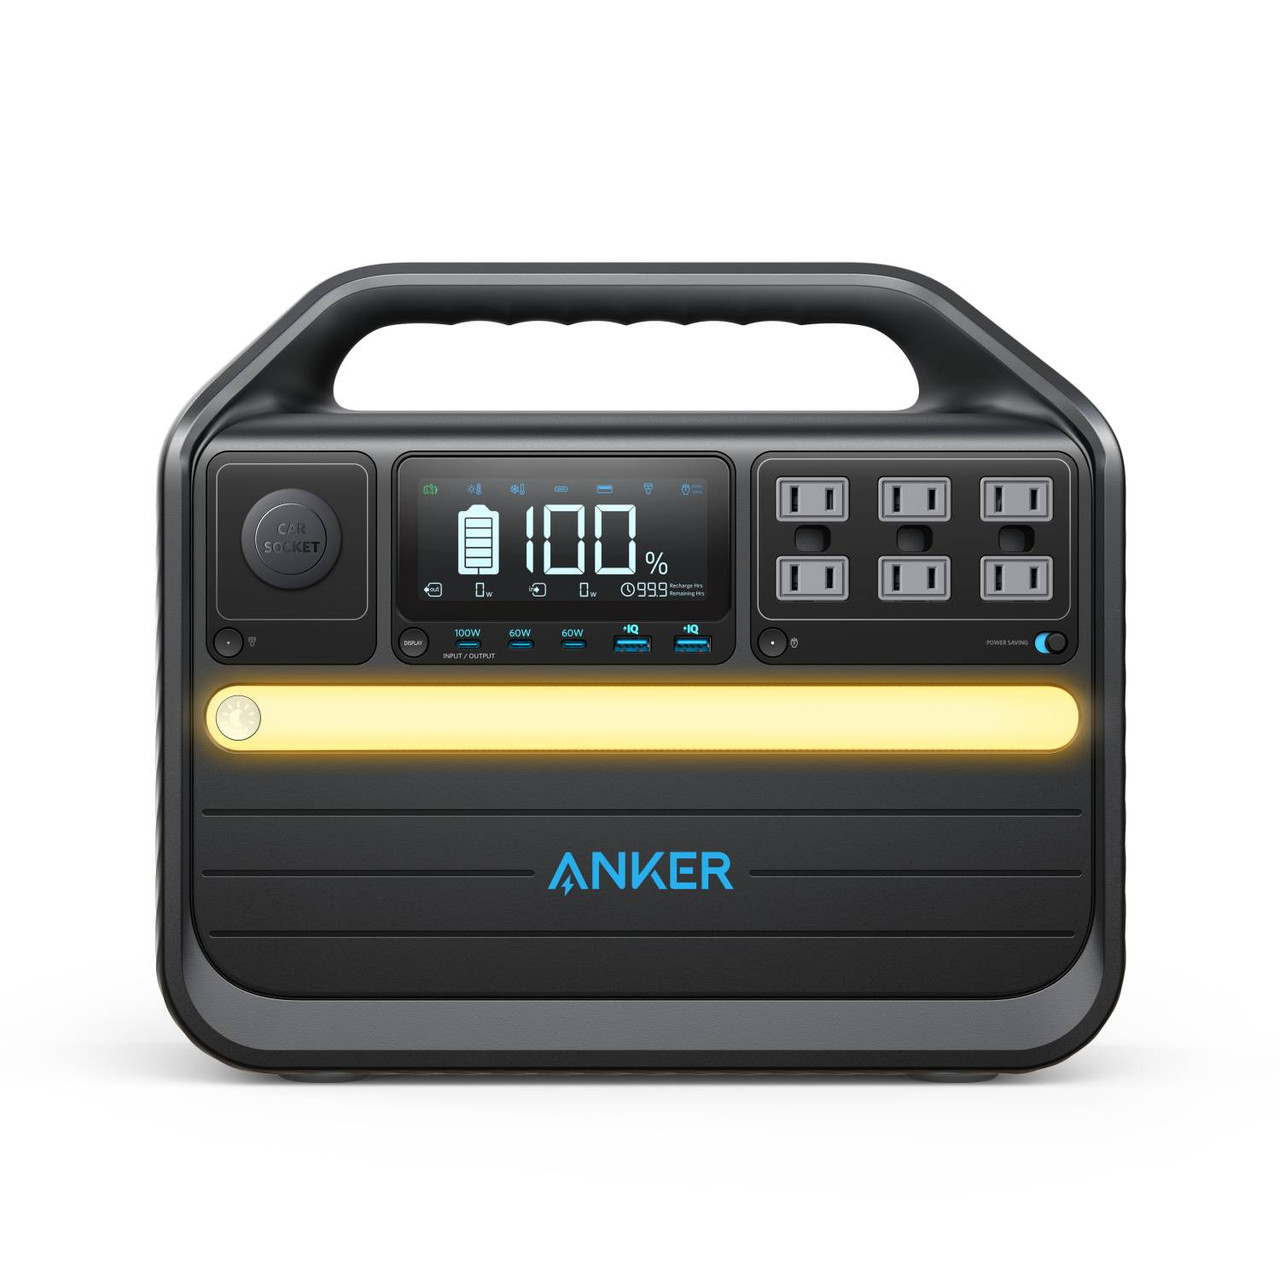 A Smart Guide on How Many Watts Does a Microwave Use - Anker US